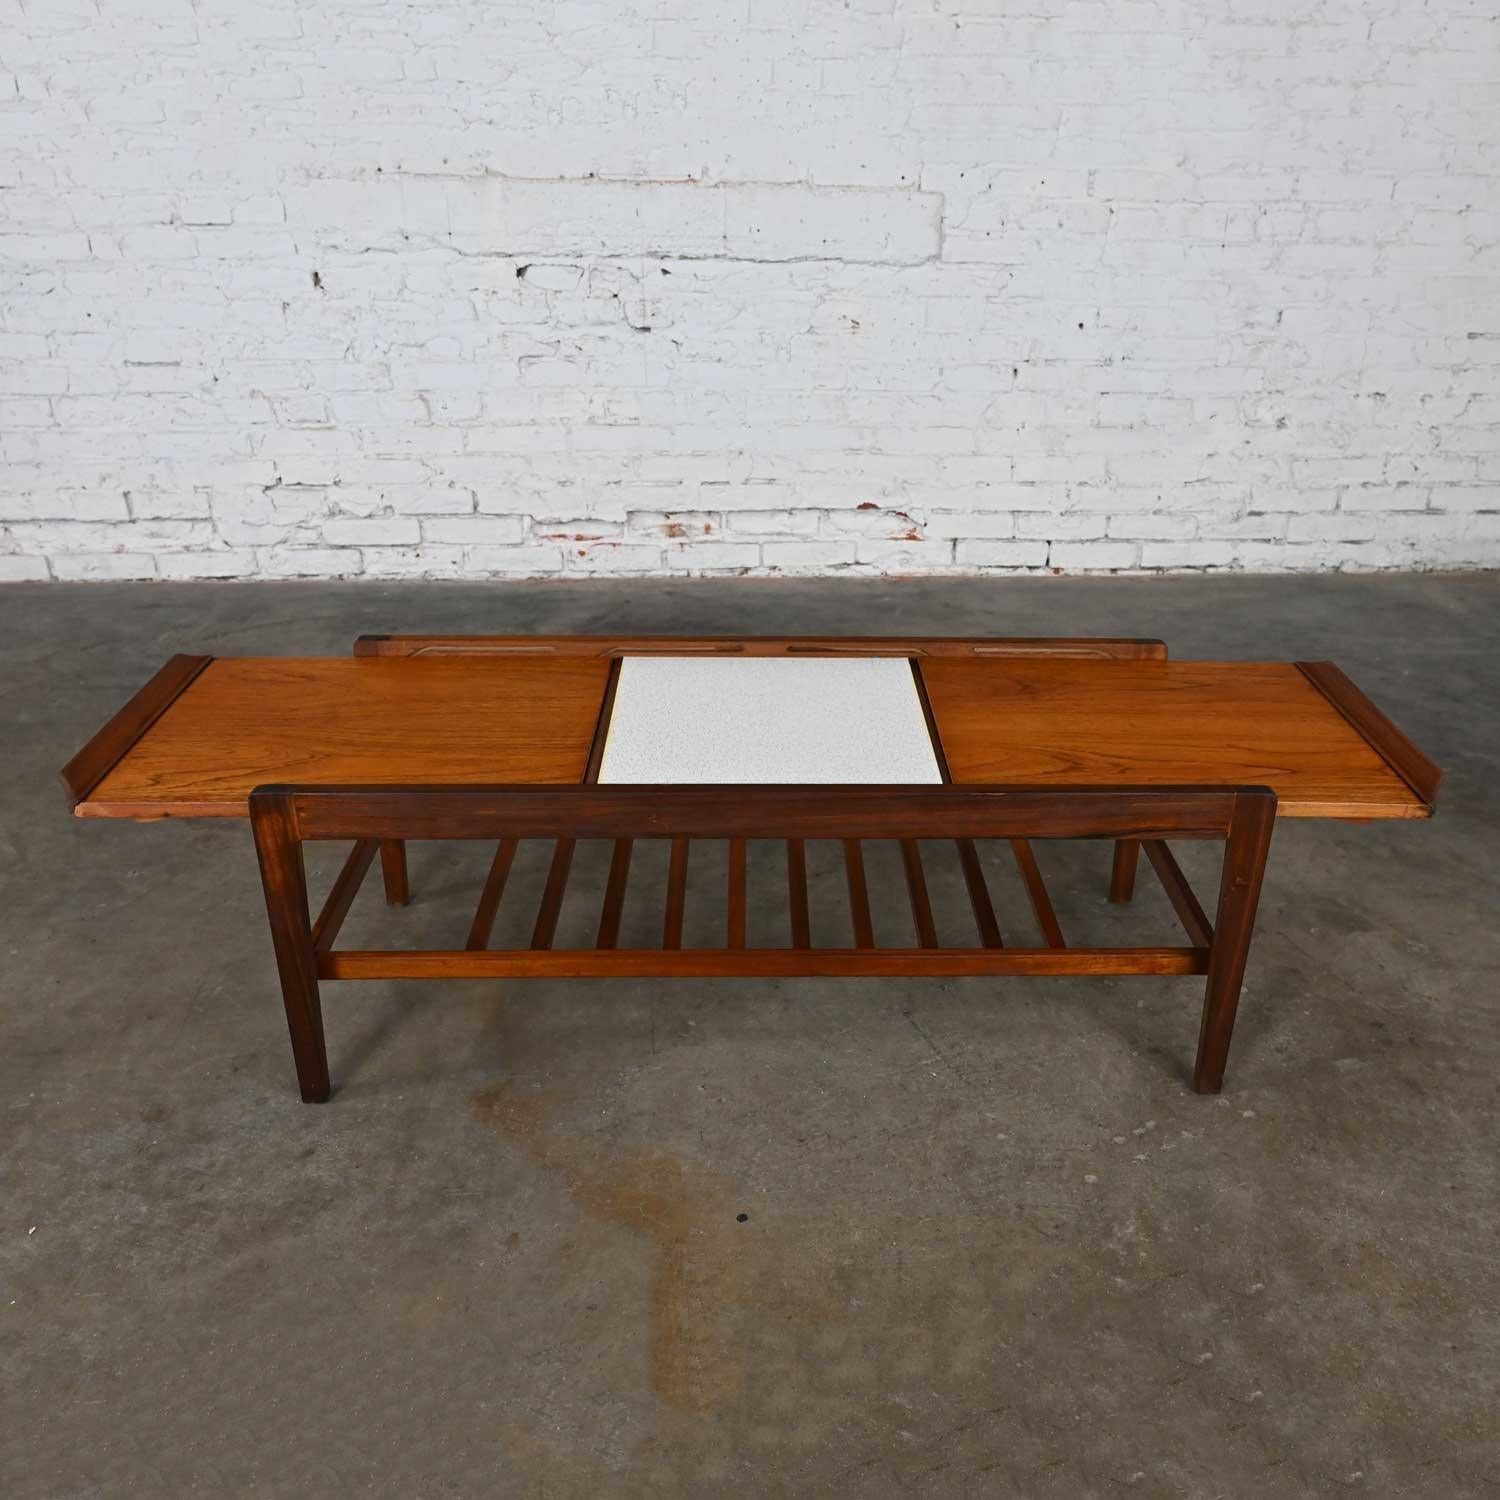 Handsome vintage MCM Scandinavian Modern style teak extending coffee table with sliding top, white Formica square center with gold leaves, and a lower slatted shelf. Beautiful condition, keeping in mind that this is vintage and not new so will have